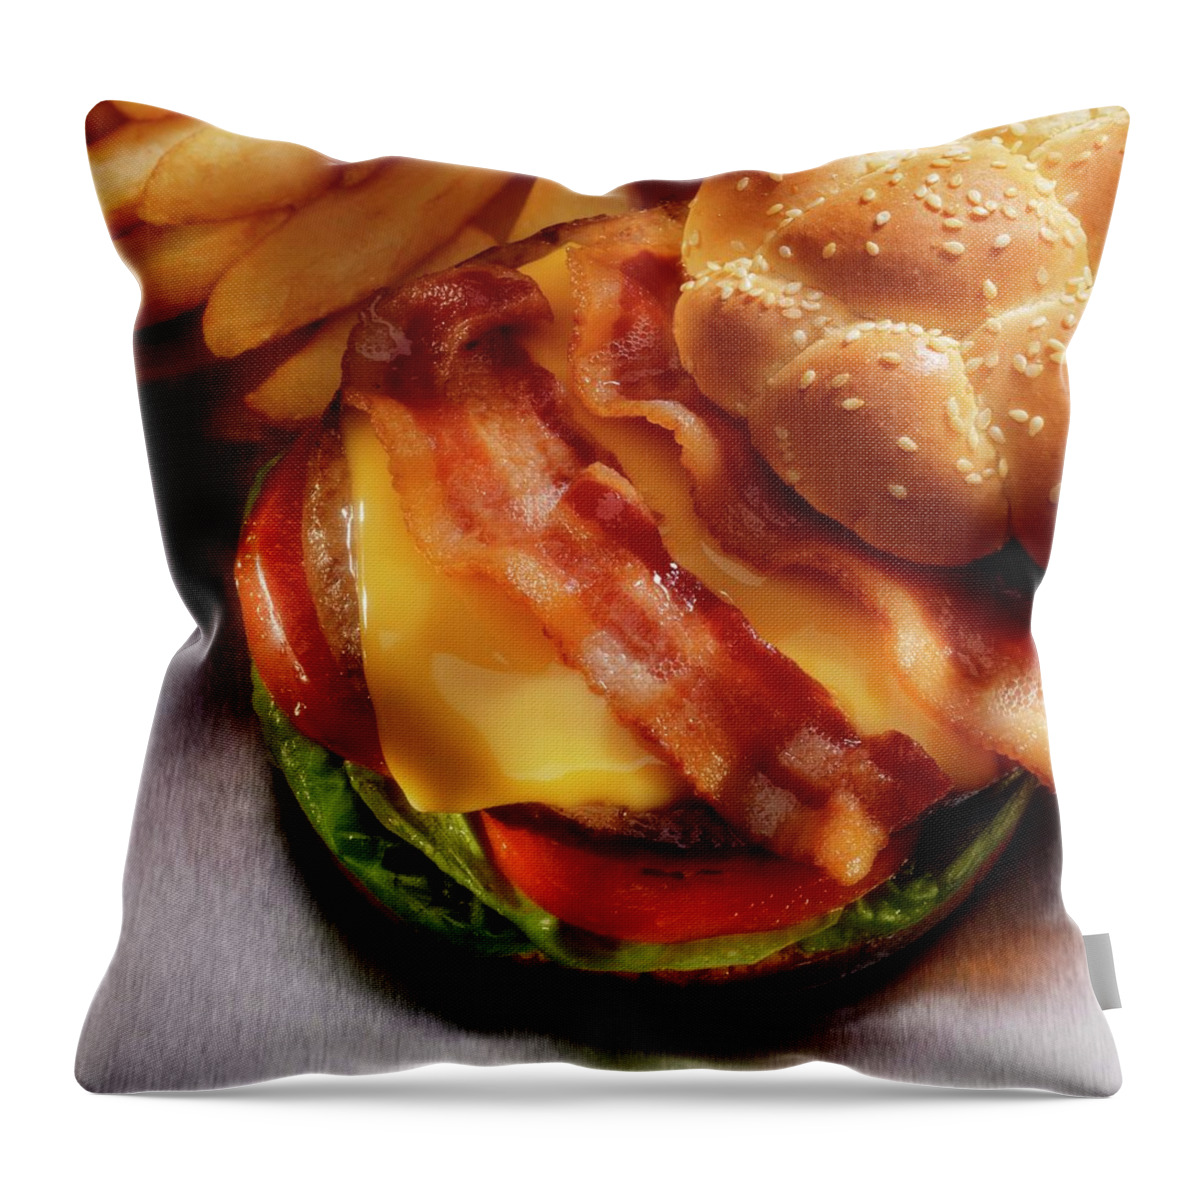 Cheese Throw Pillow featuring the photograph Bacon Cheeseburger With French Fries by Jupiterimages